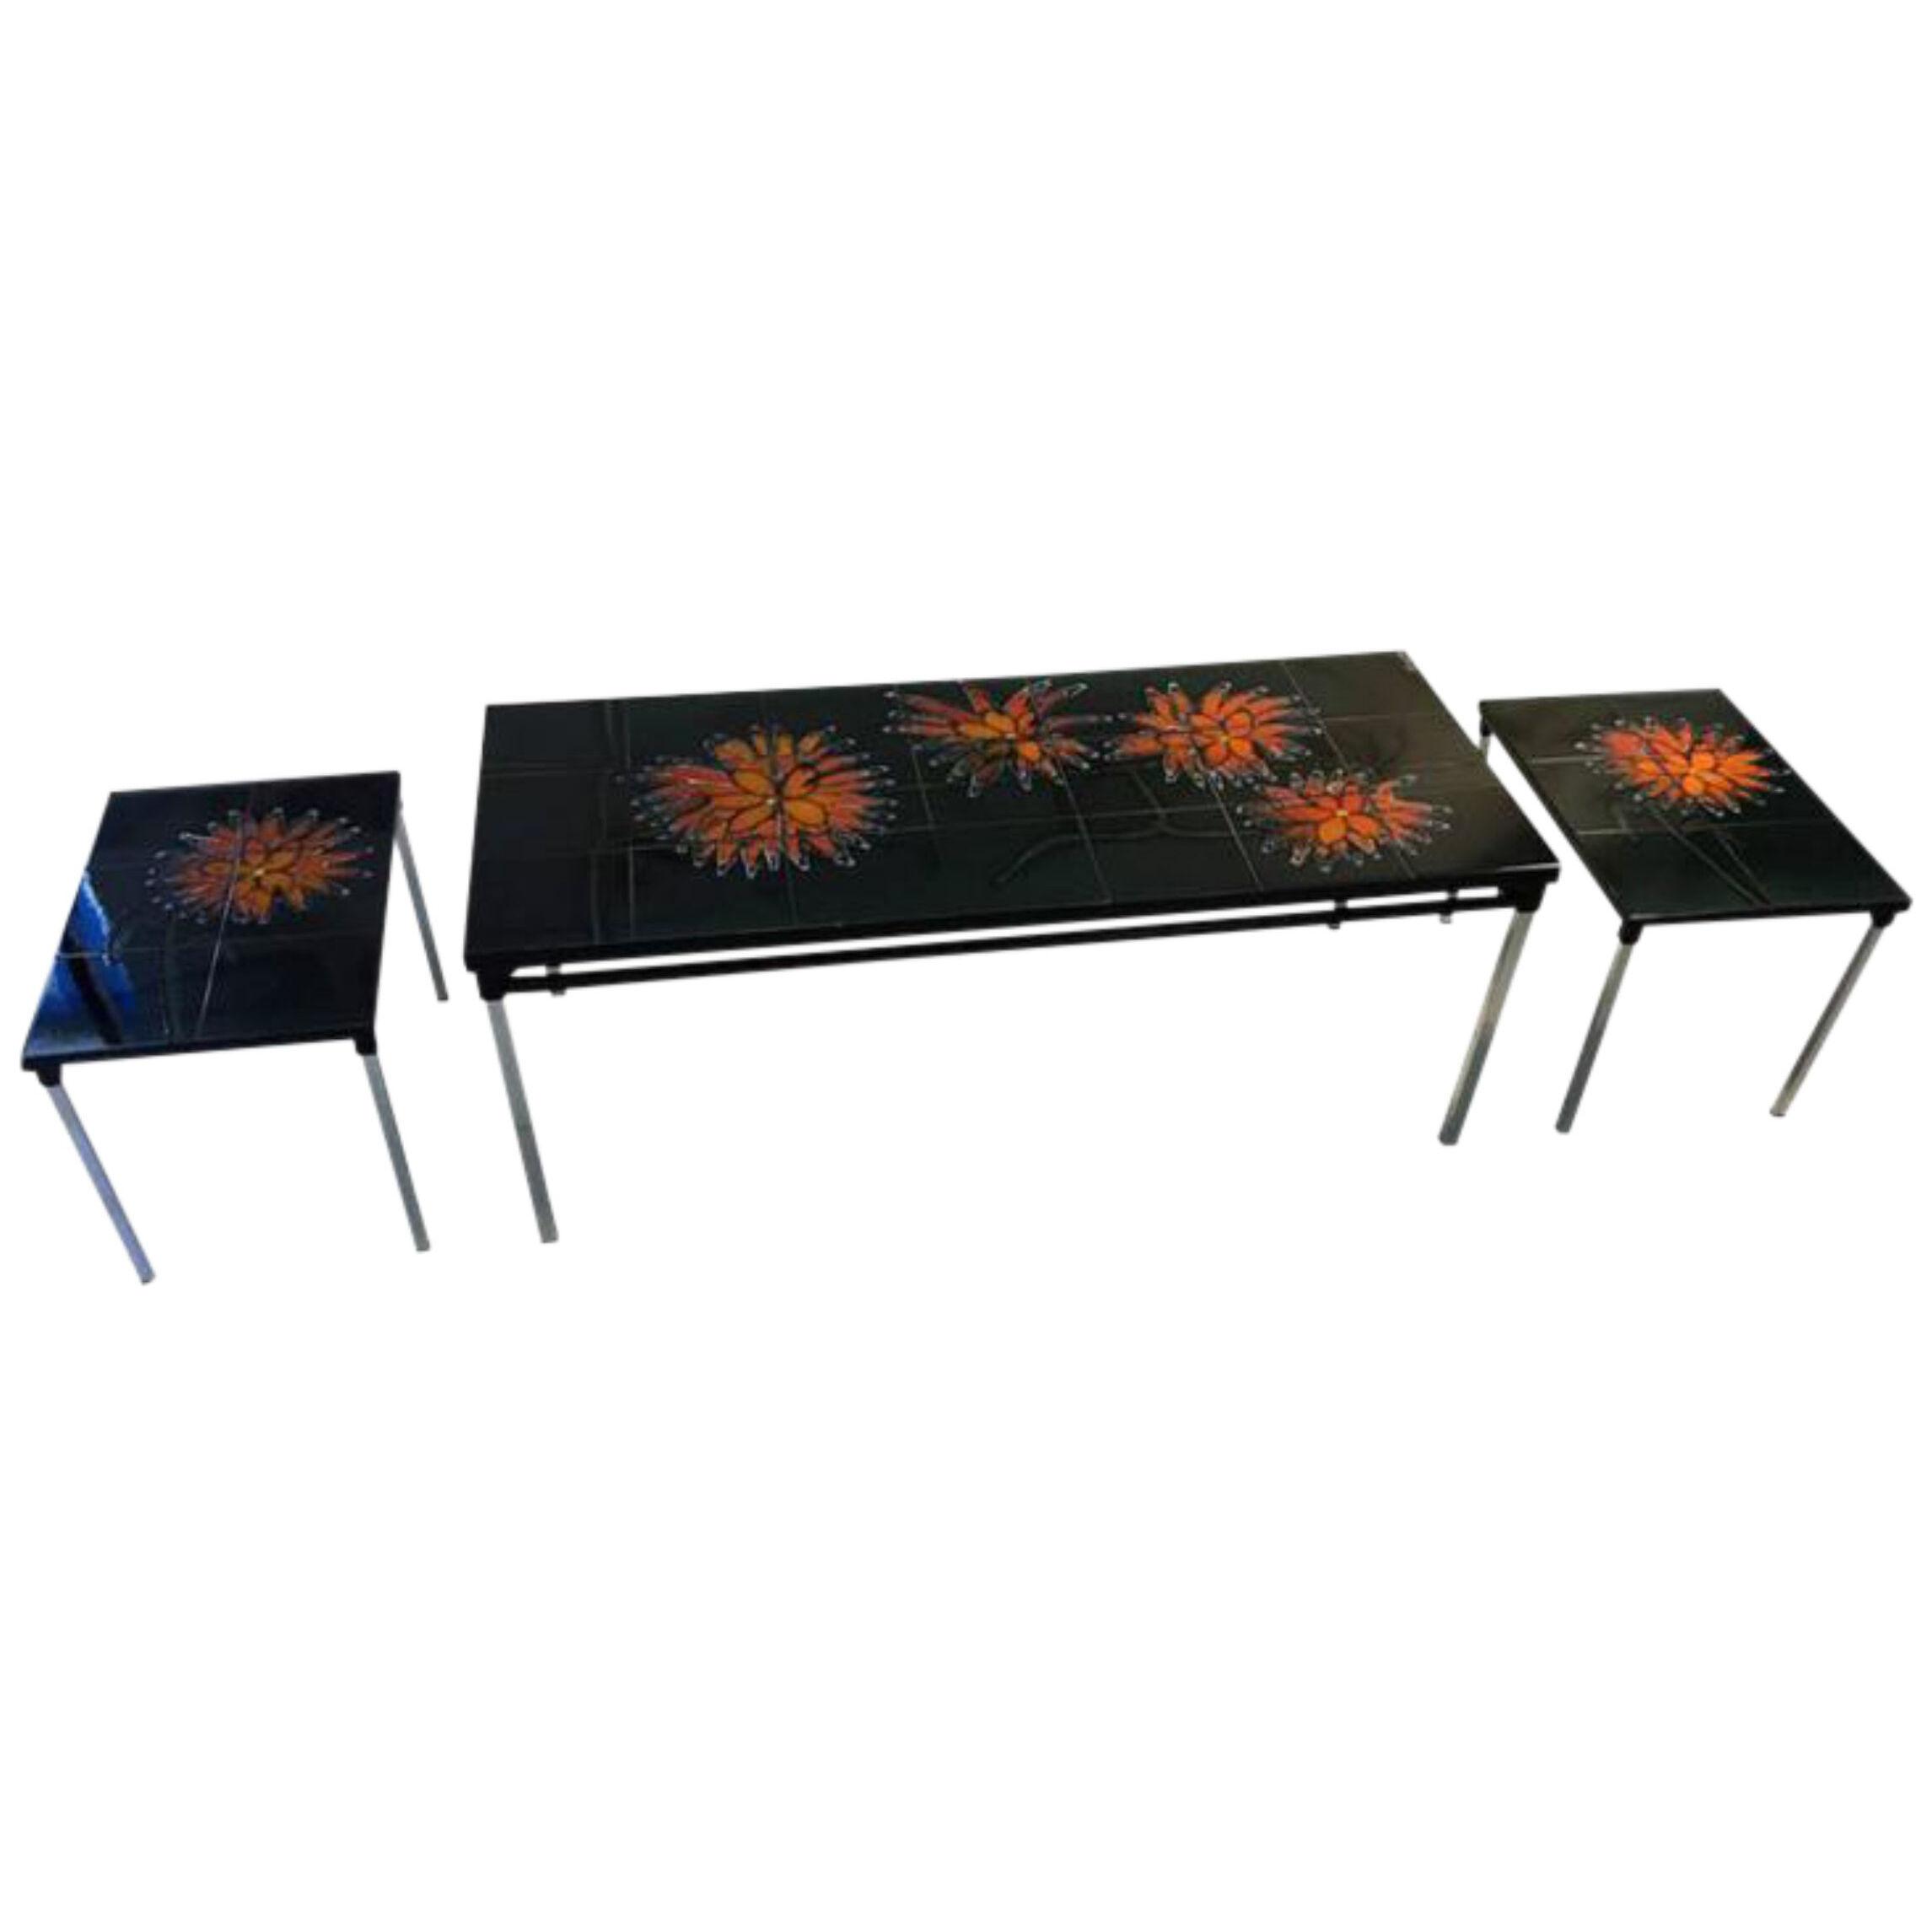 Flower Power Italian Tile Coffee Table and End Tables - a Pair	